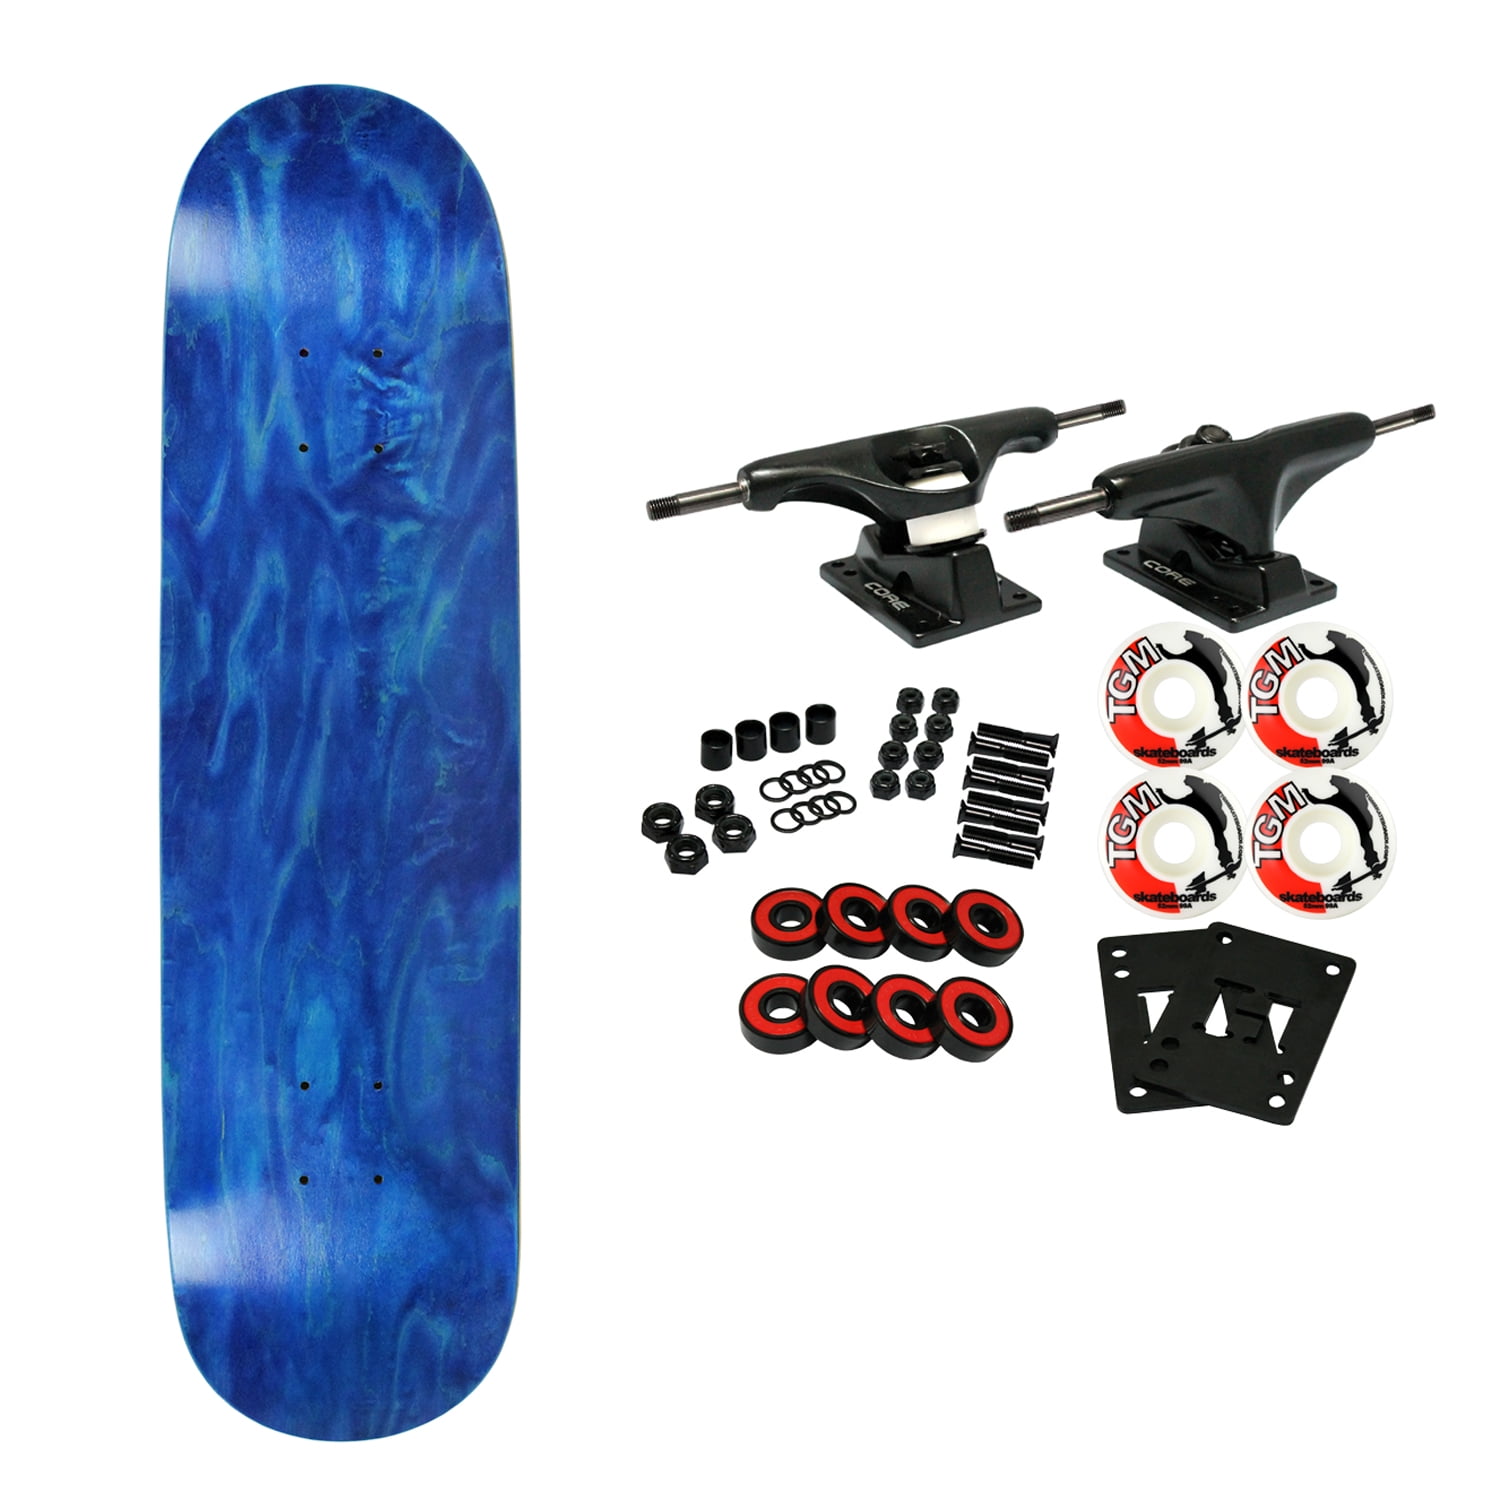 Details about   Moose Complete Skateboard STAINED BLUE 7.75" Black/White ASSEMBLED 